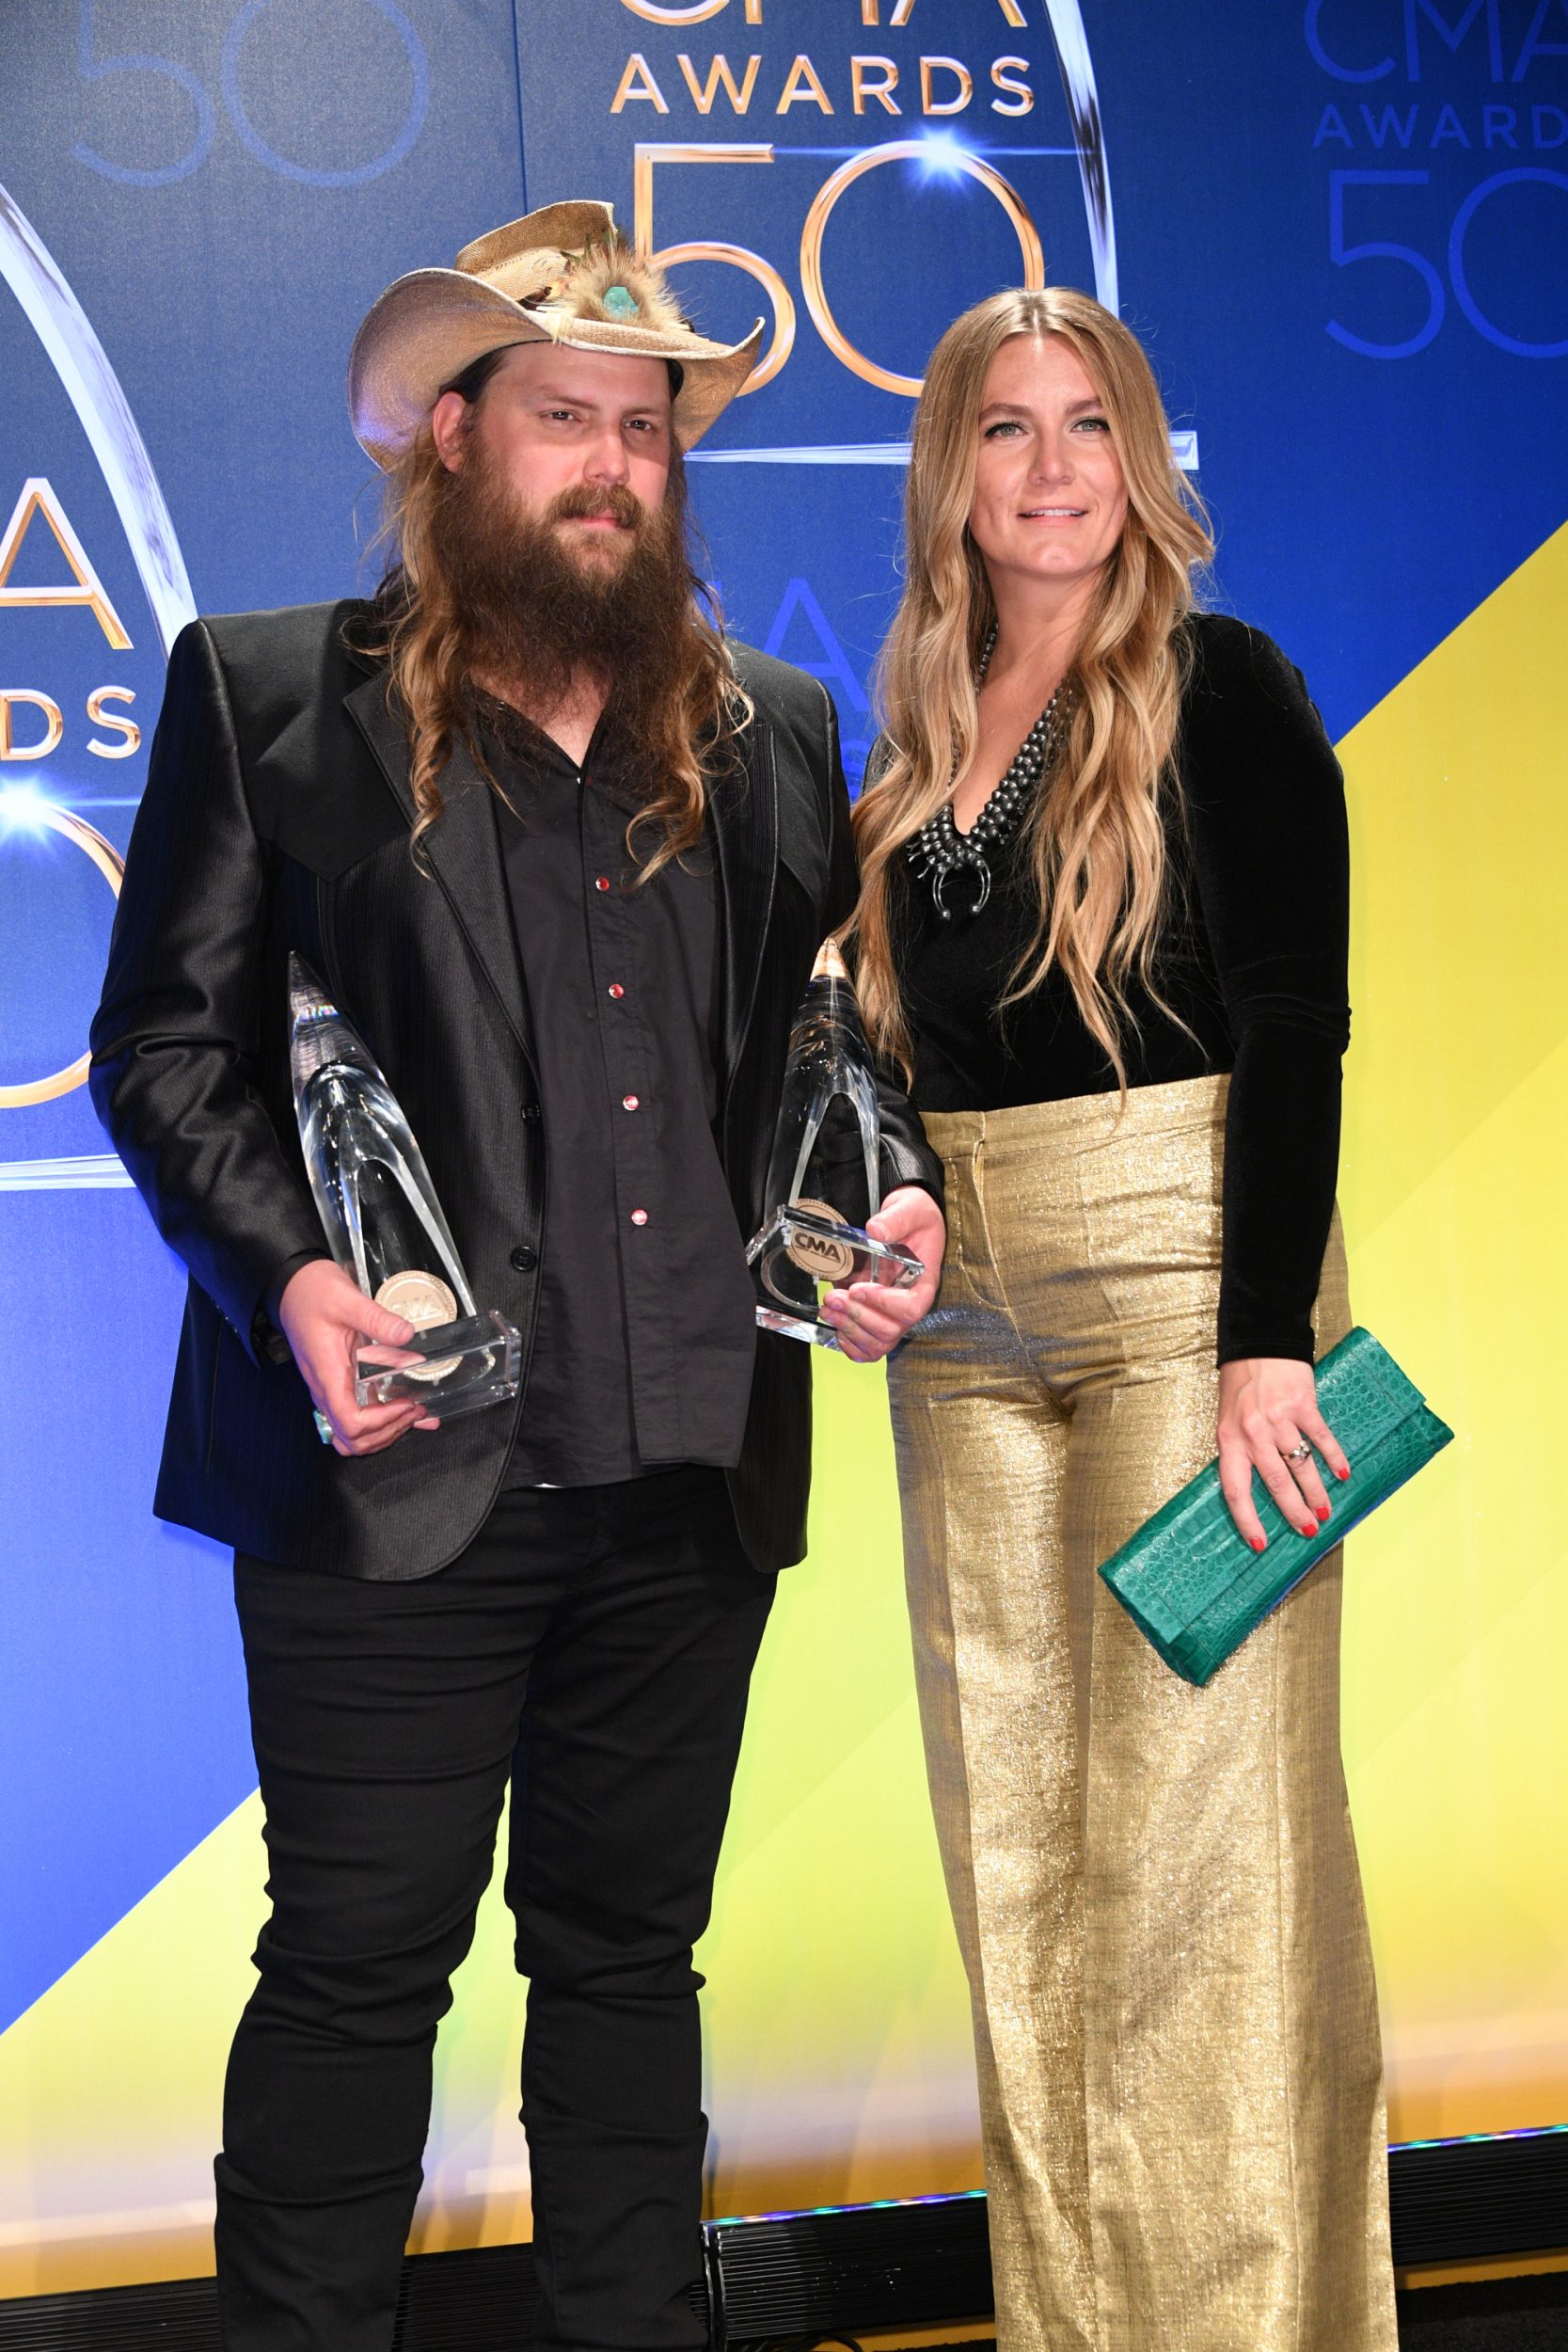 THE 50th ANNUAL CMA AWARDS - ÒThe 50th Annual CMA Awards,Ó hosted by Brad Paisley and Carrie Underwood, broadcasts live from the Bridgestone Arena in Nashville, Wednesday, November 2 (8:00-11:00 p.m. EDT), on the ABC Television Network. (ABC/Brett Oronzio) CHRIS STAPLETON